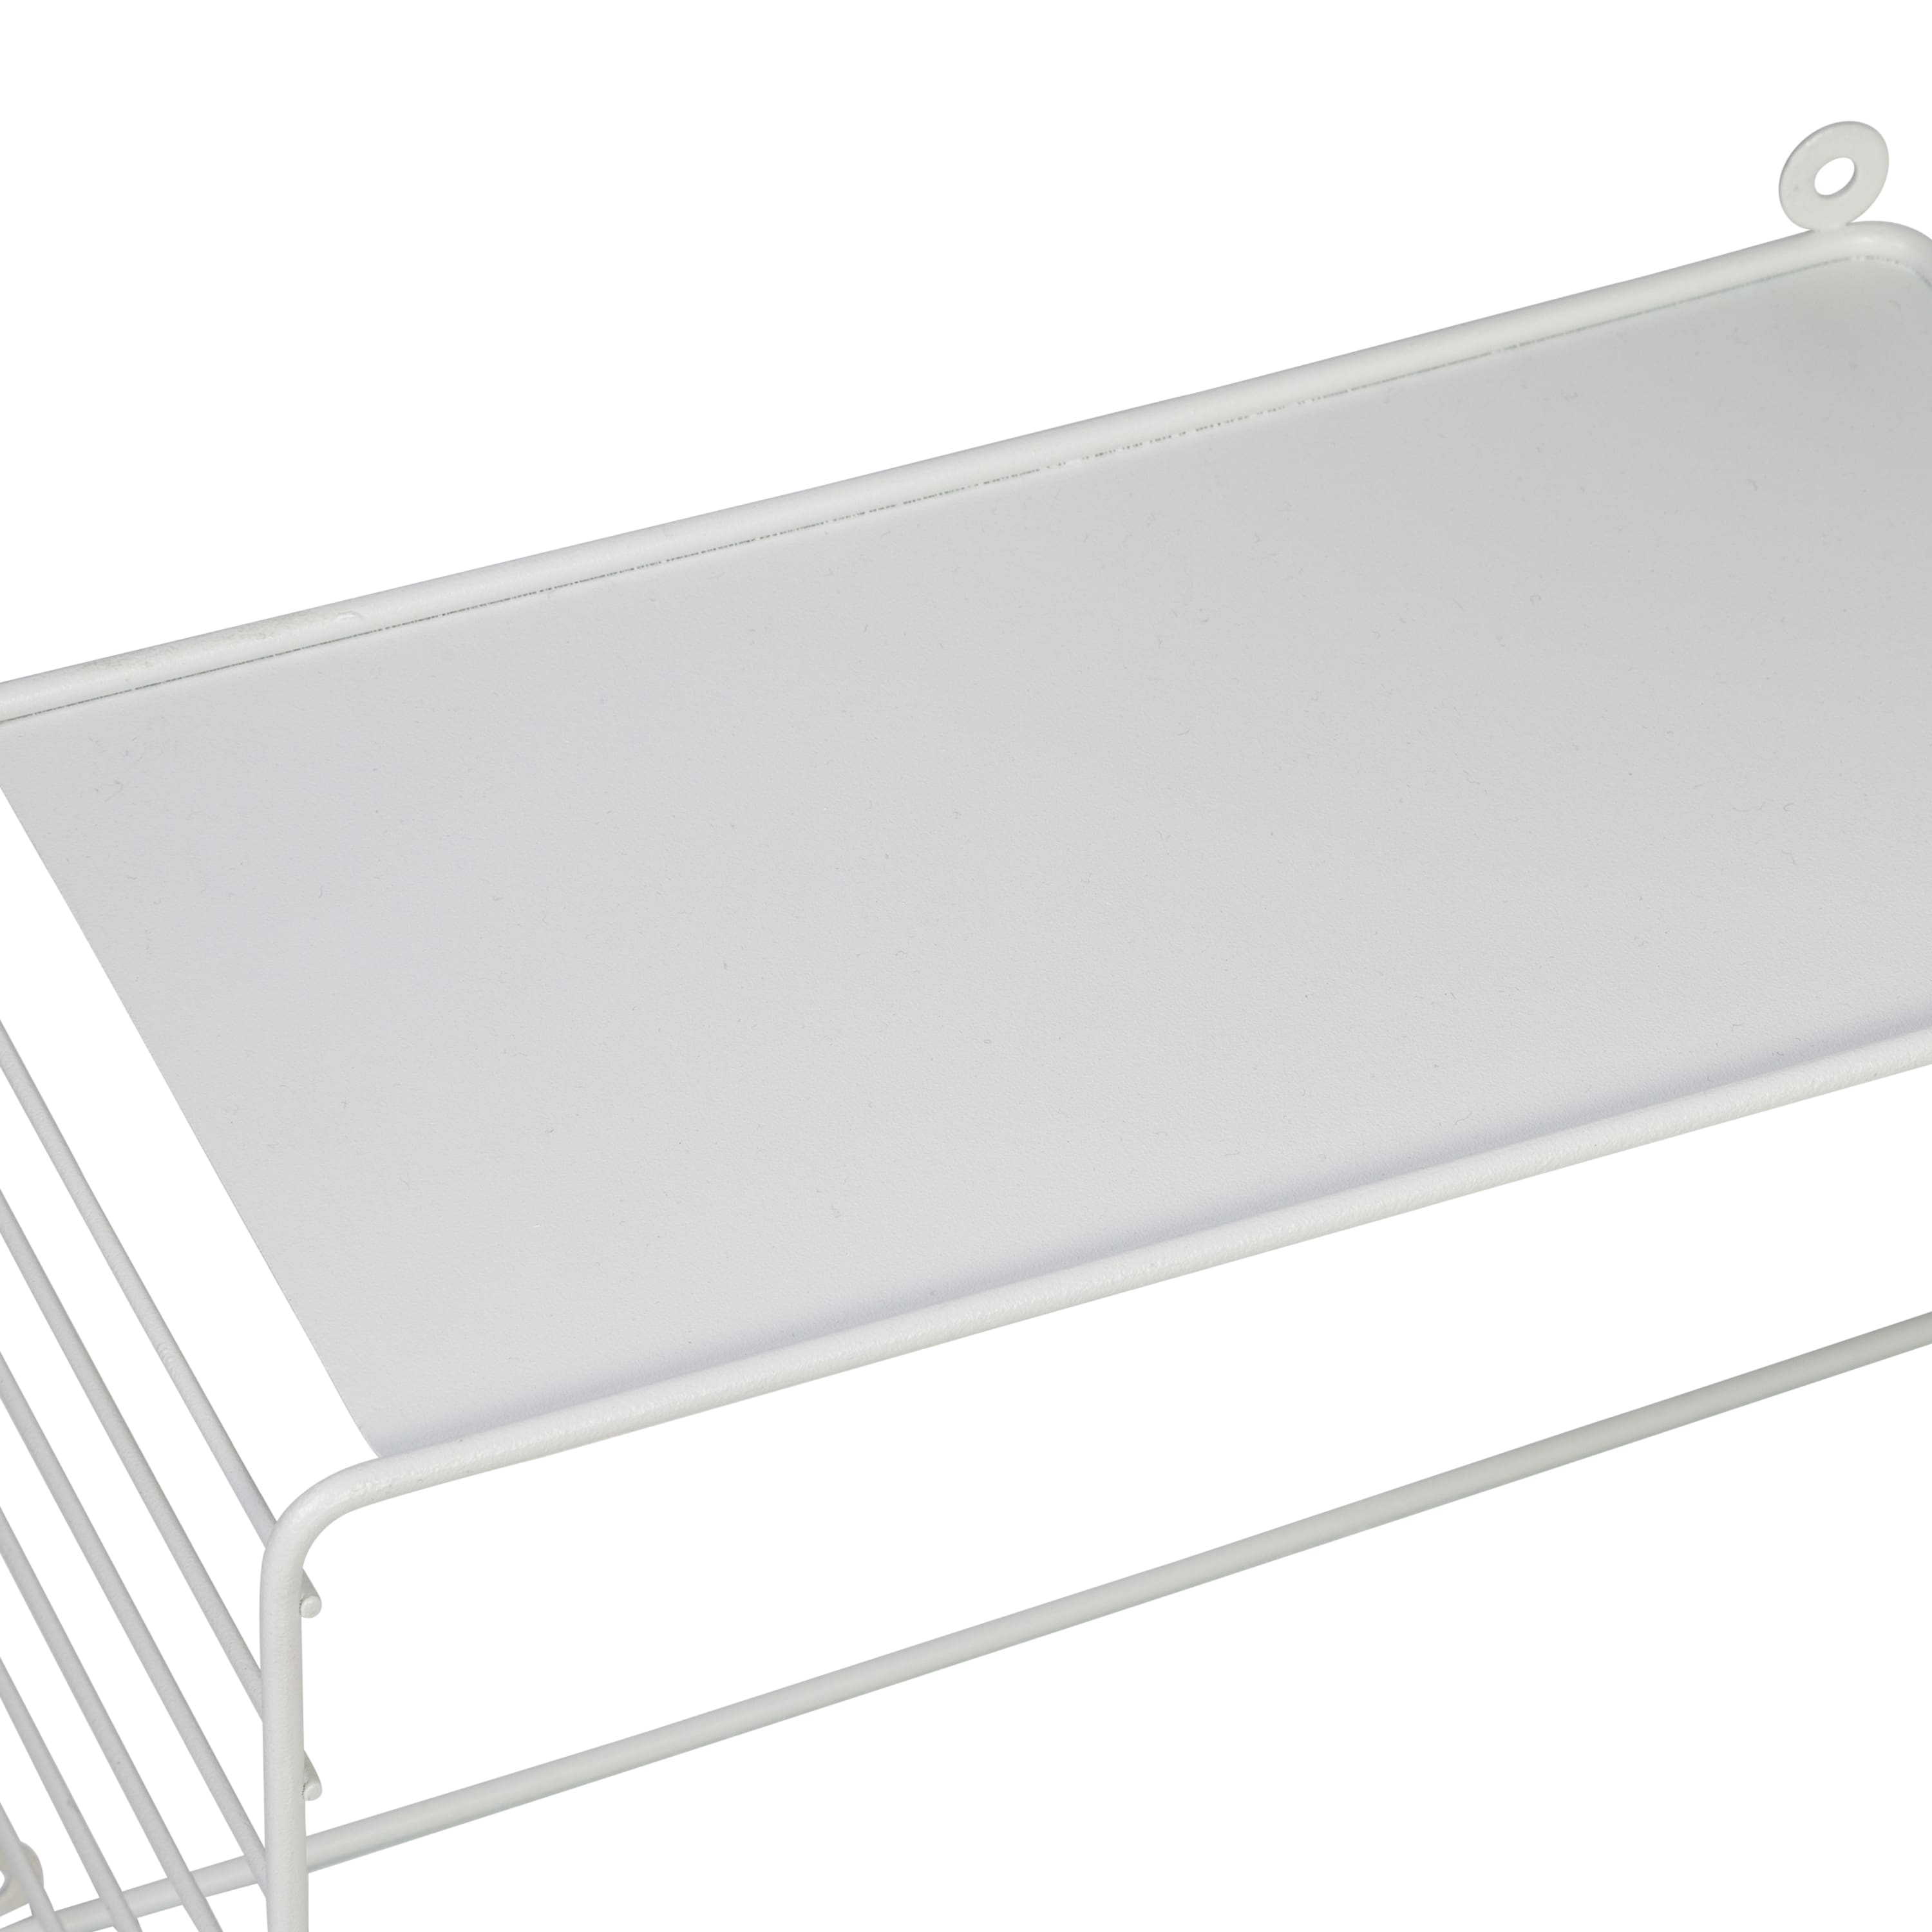 Honey Can Do White 3-Tier Floating Square Wall Shelf